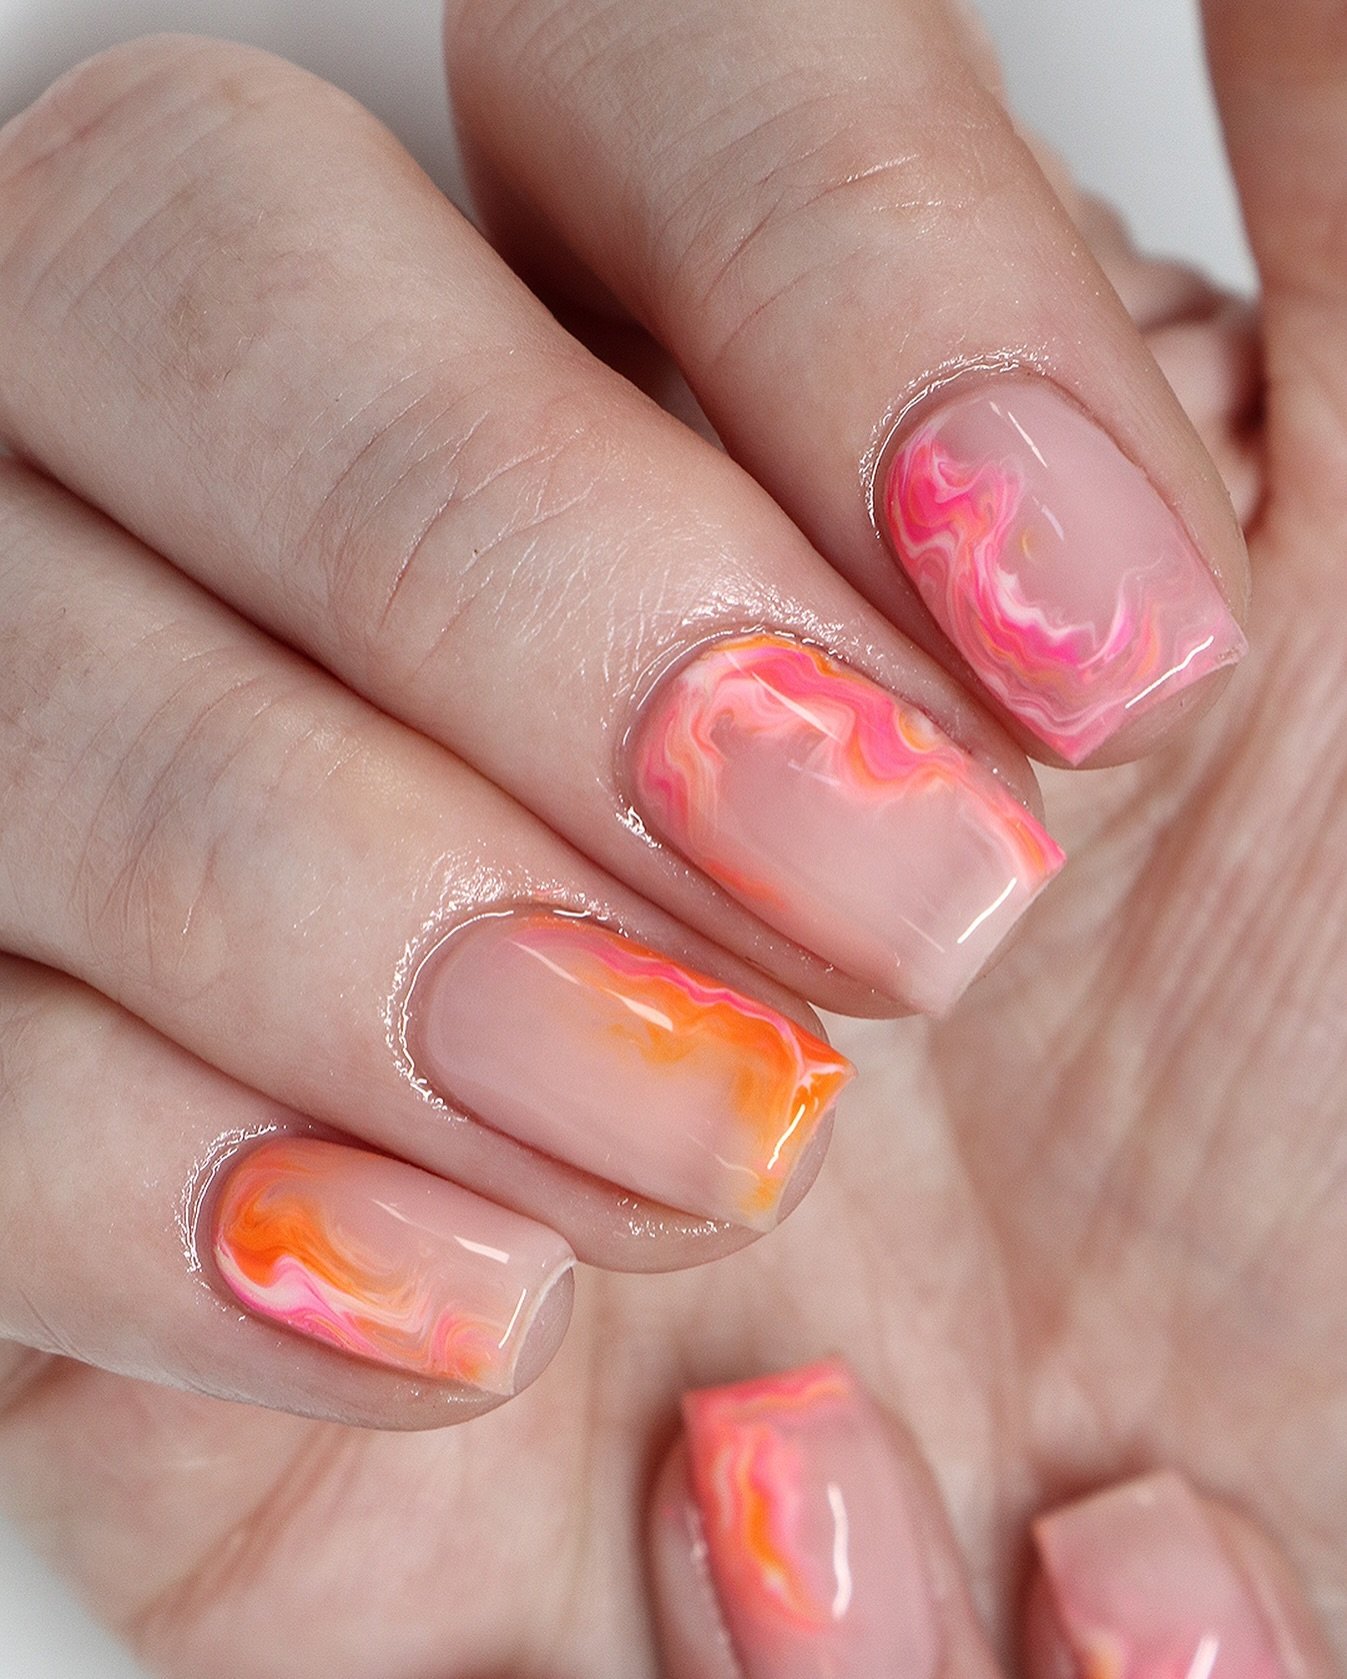 Firey melted marble 🔥

Comment MARBLE to grab the Melted Marble Masterclass!

shop this look at @tickledpinquecanada 🛒

&bull; Prep
&bull; Prime
&bull; Base Gel
&bull; Gelato Sculpting Gel in Ice Cream
&bull; Colour Gels in 050, 058, 072 and 150
&b